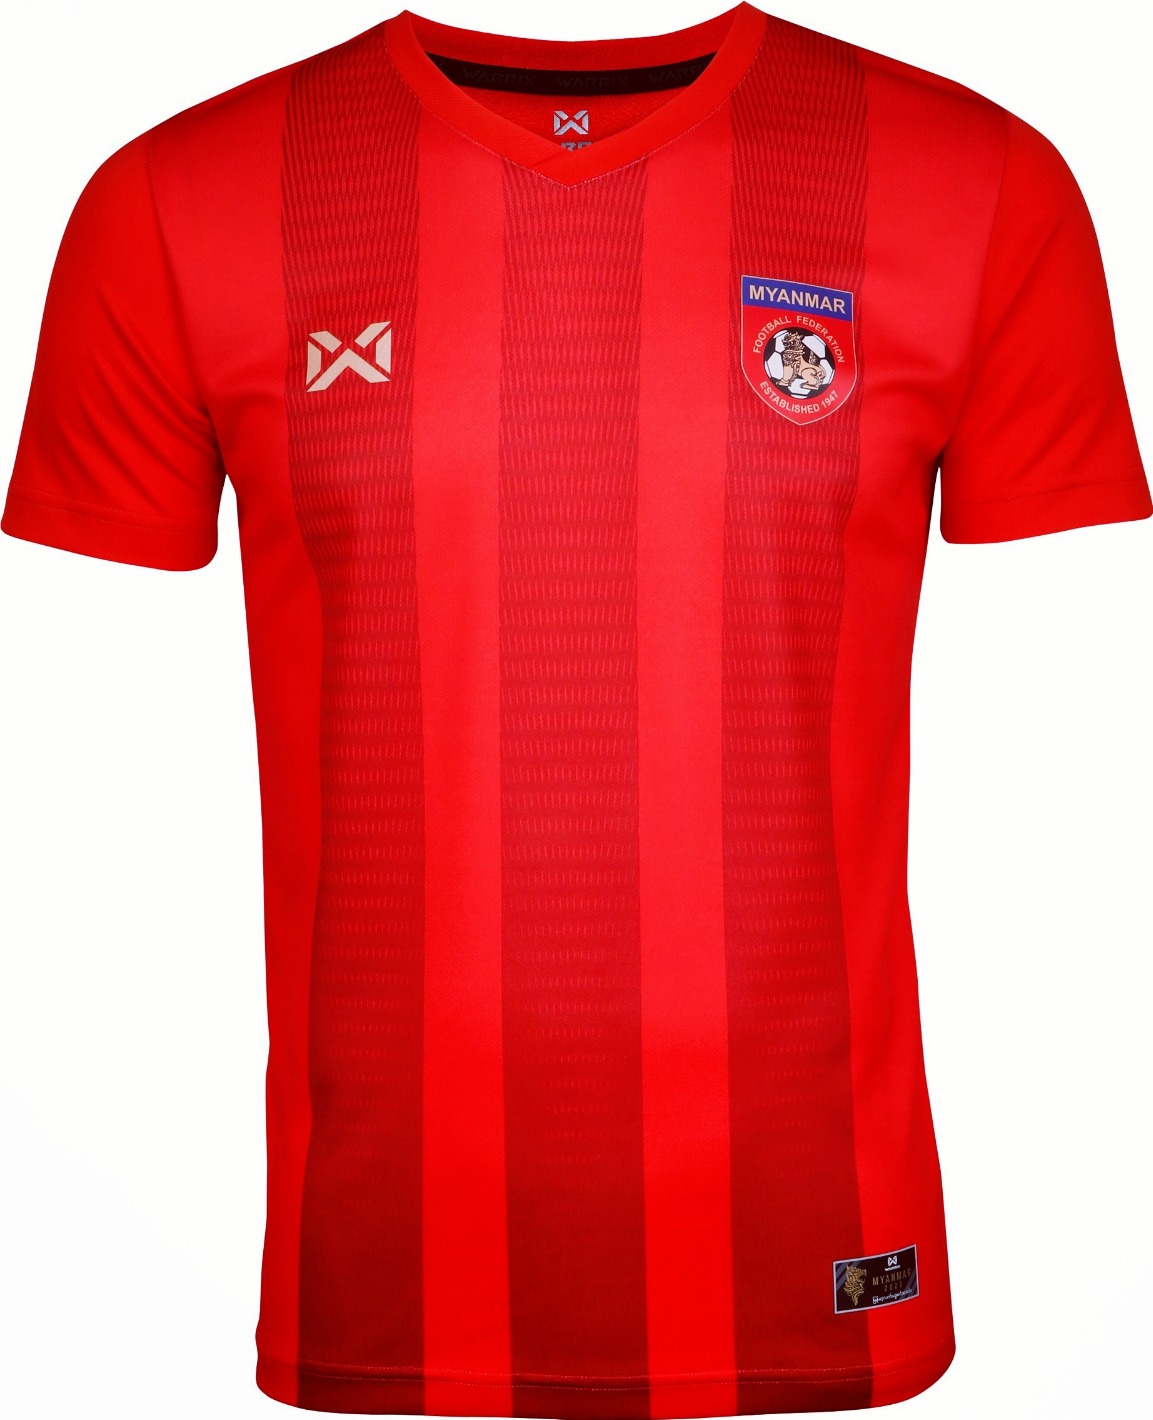 2020-2022 Myanmar National Team Football Soccer Authentic Genuine Jersey Shirt Red